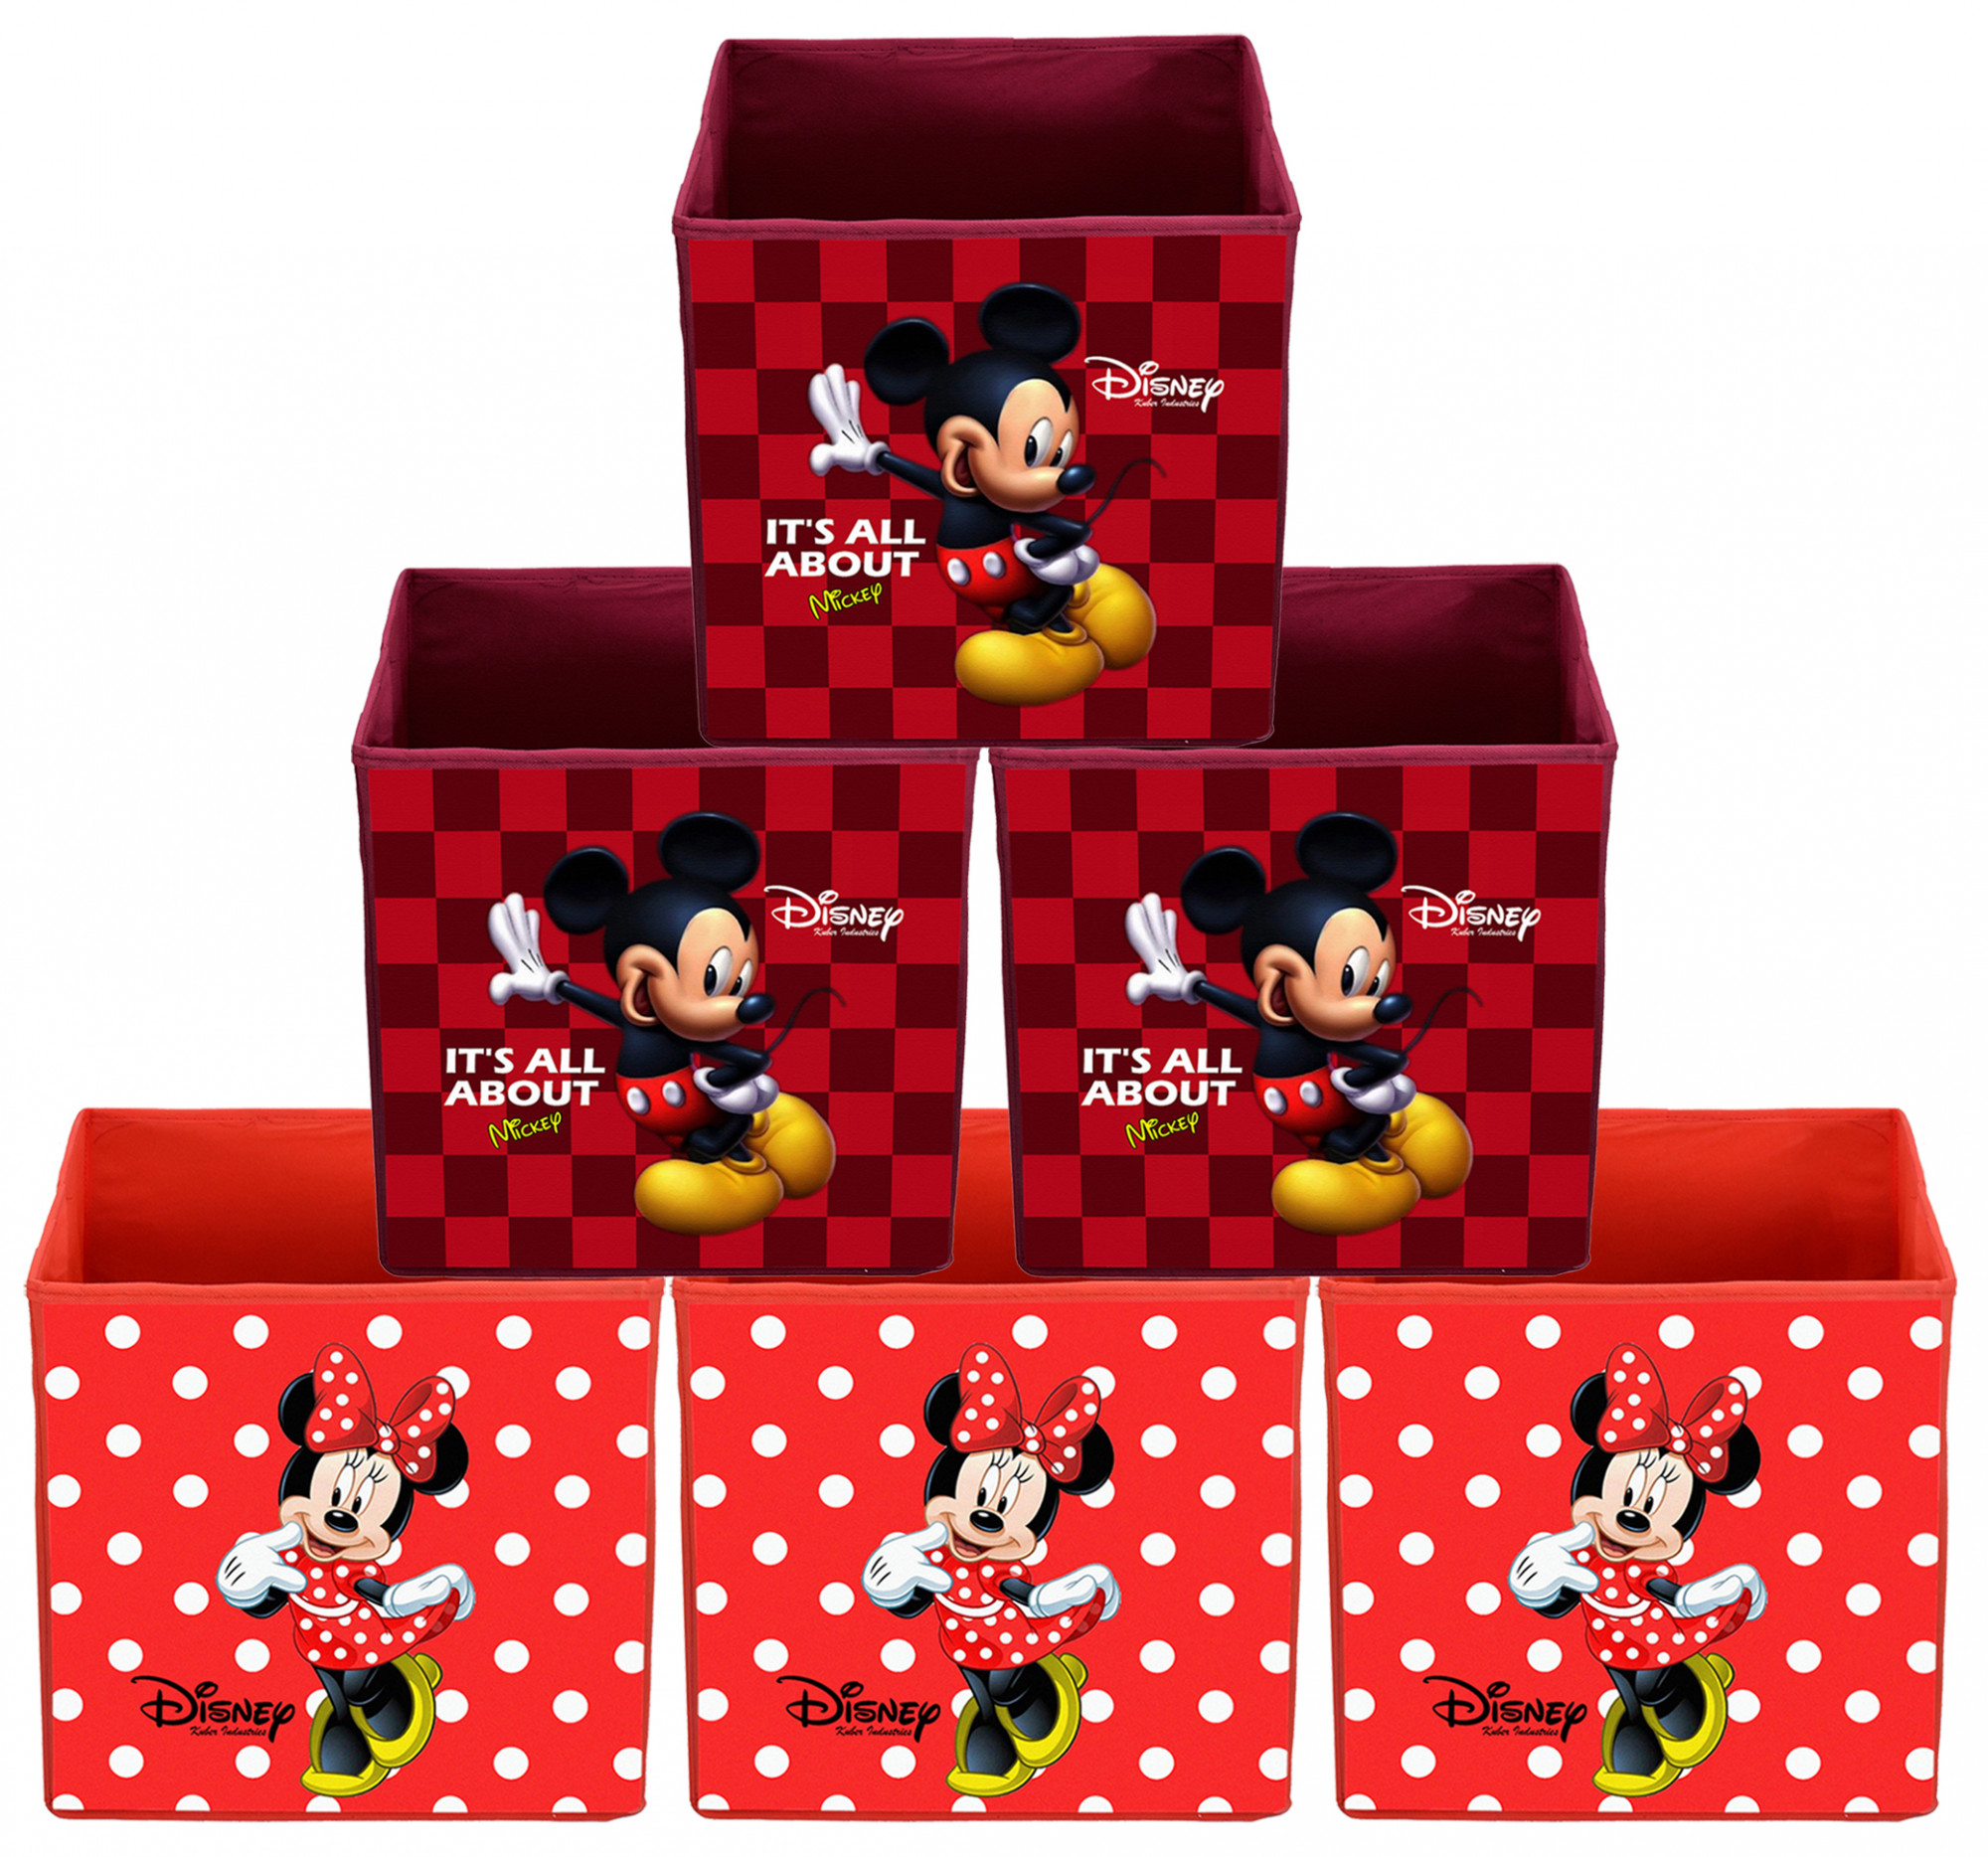 Kuber Industries Disney Mickey Minnie Print Non Woven Fabric Foldable Large Size Storage Cube Toy,Books,Shoes Storage Box With Handle (Red & Maroon)